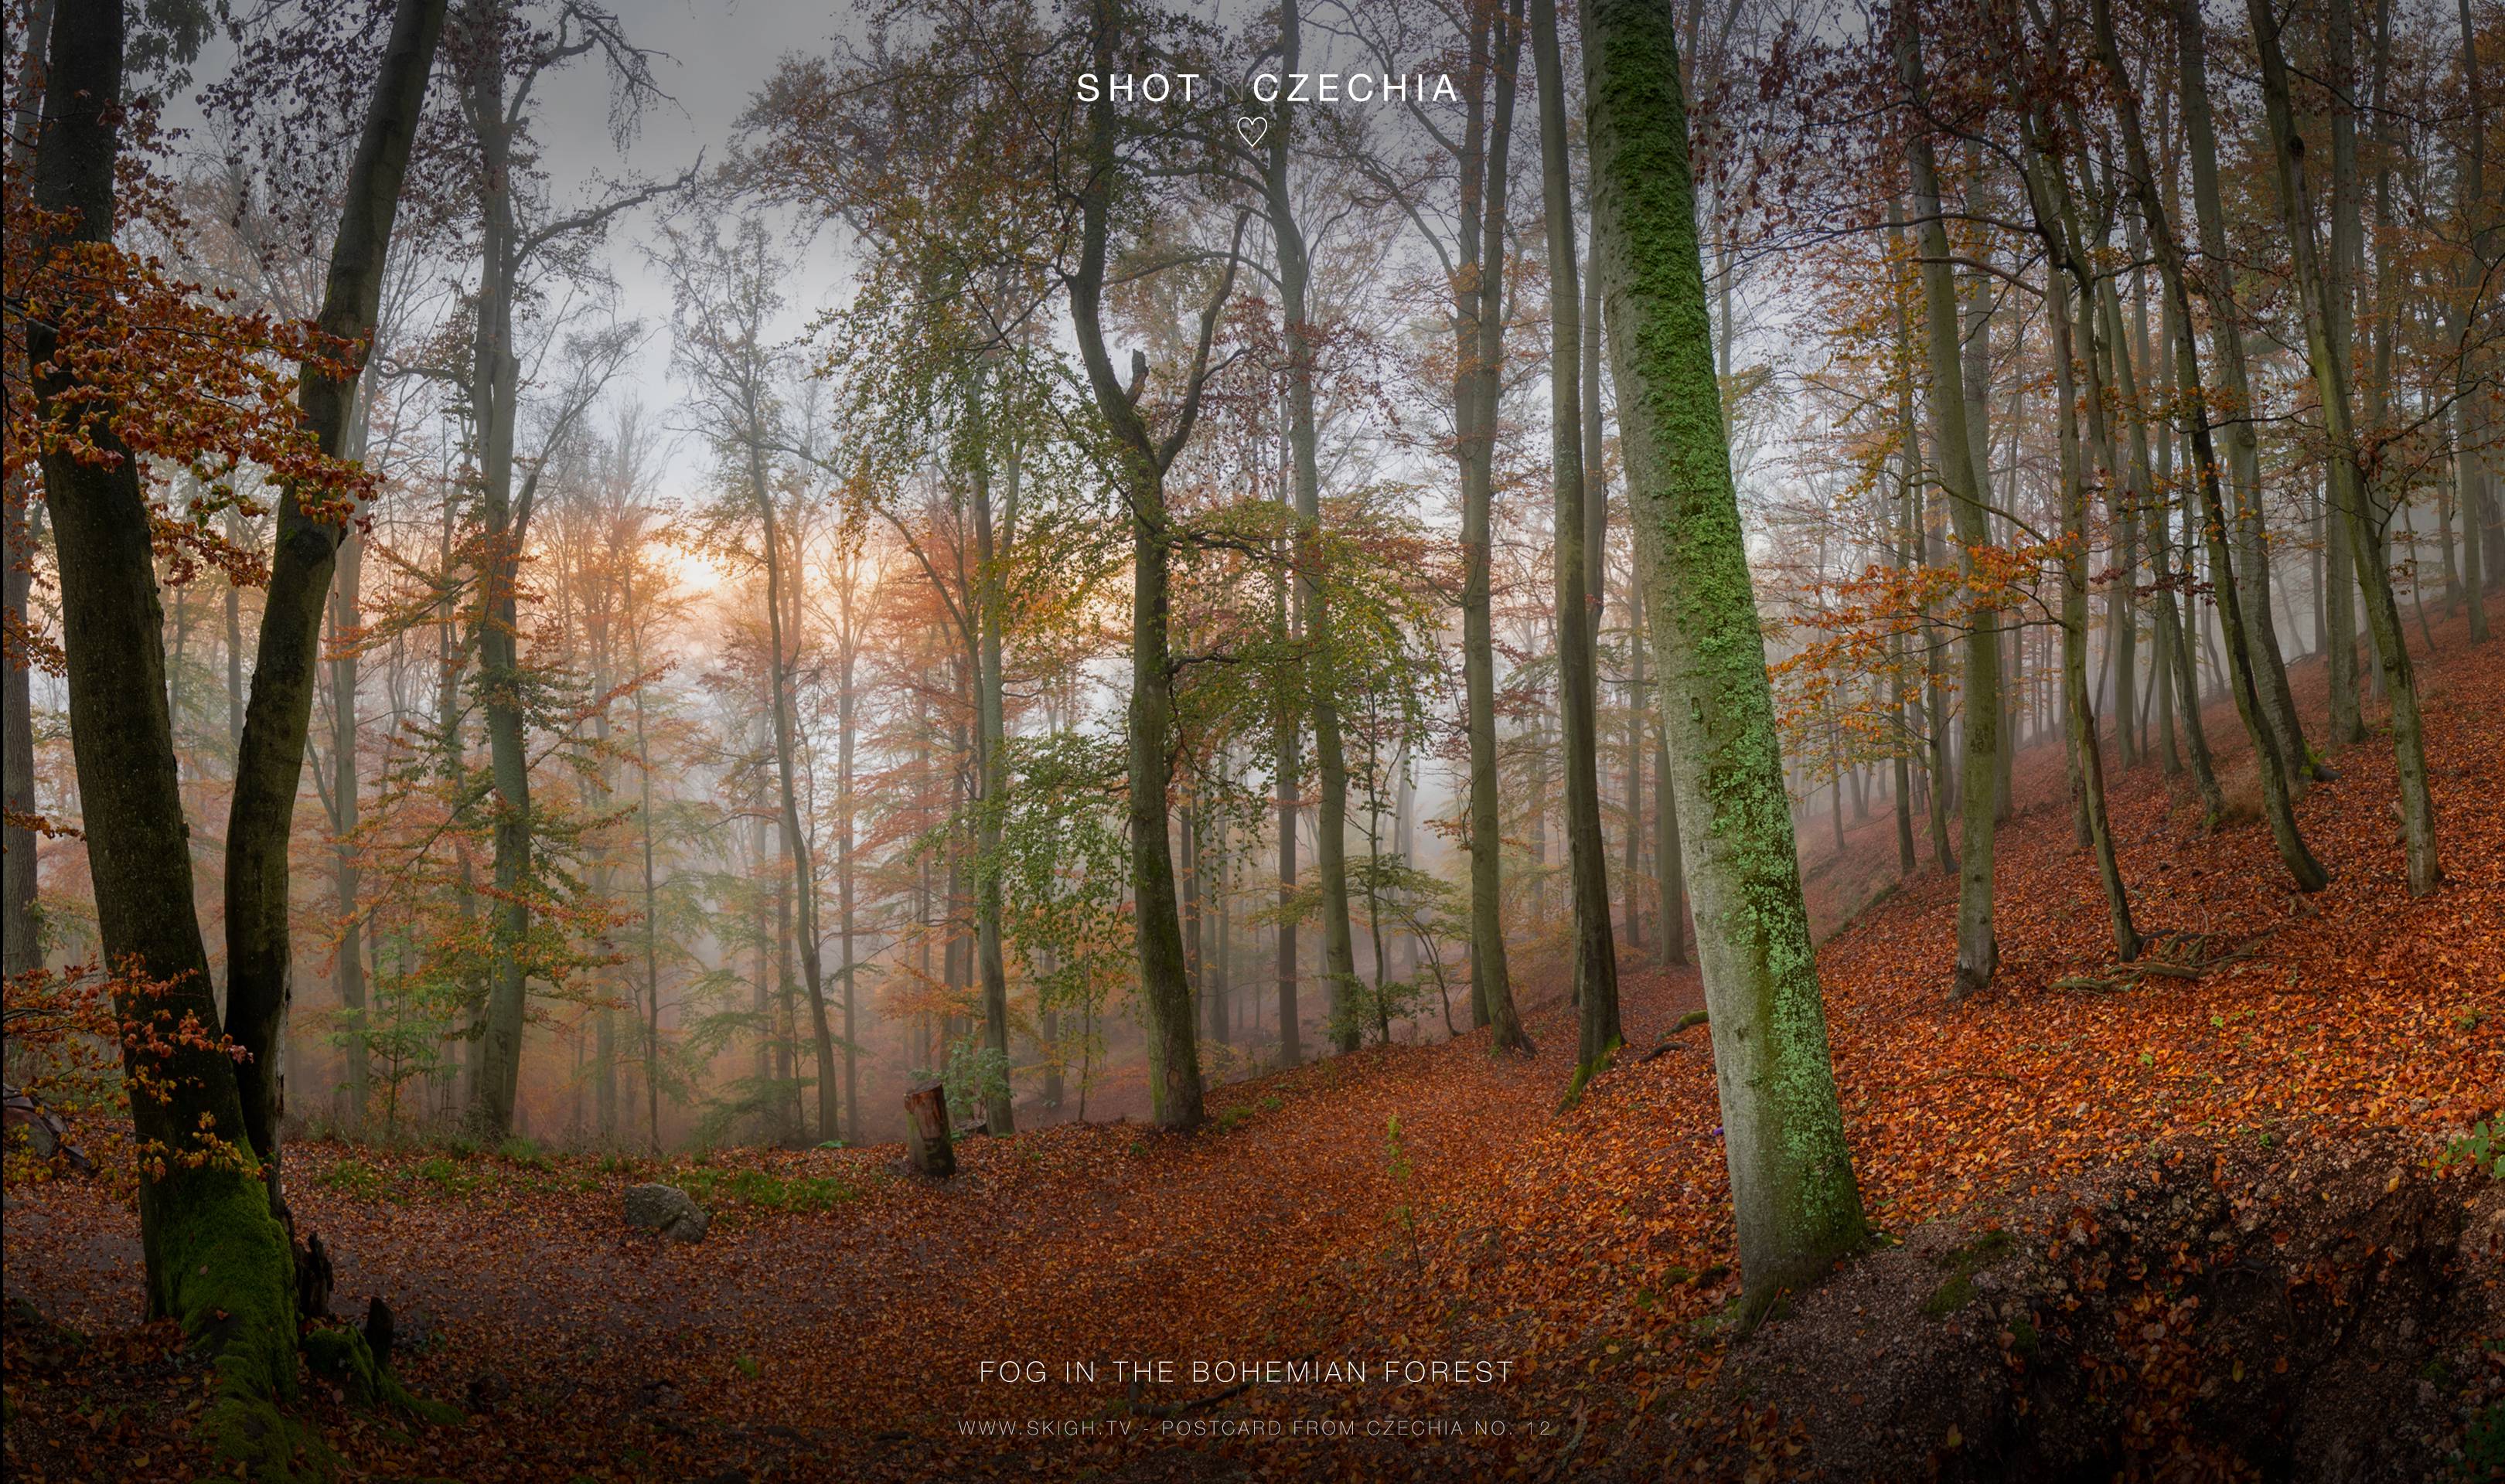 Fog in the Bohemian Forest